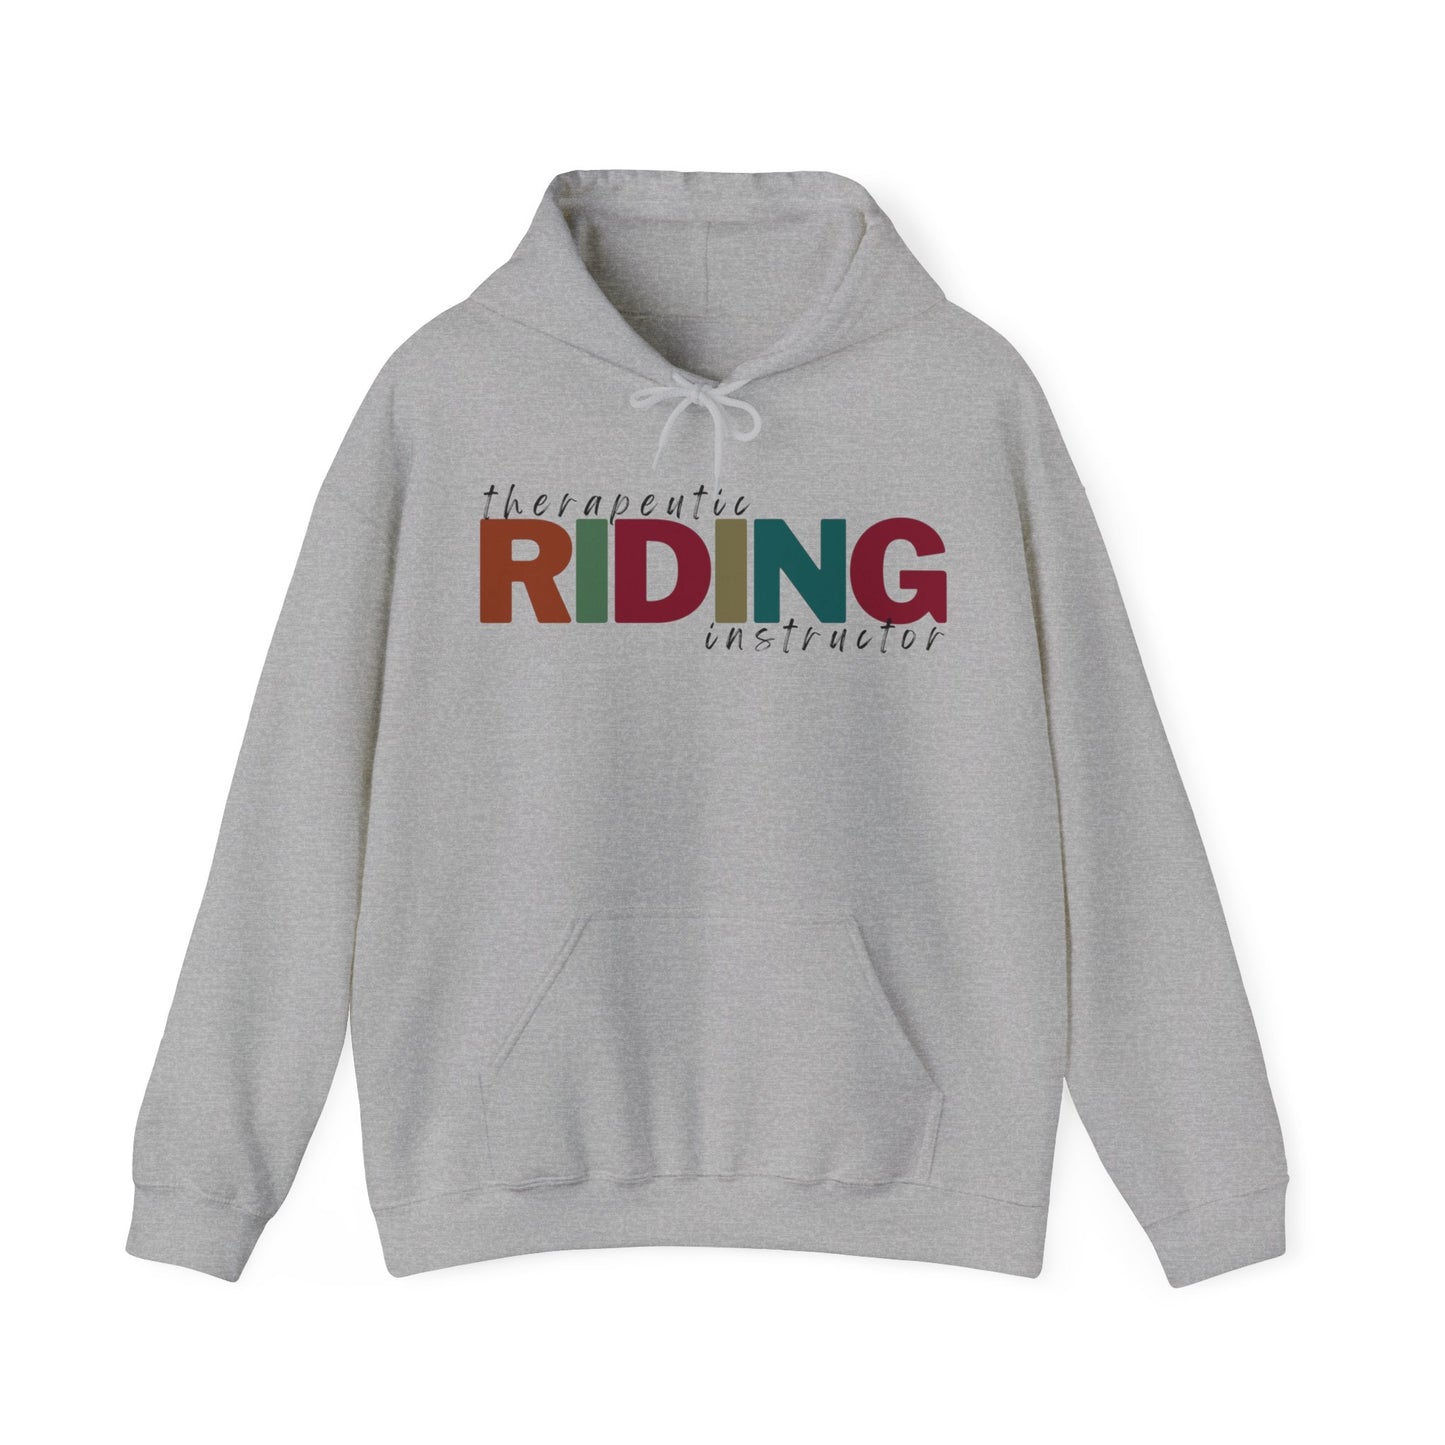 Therapeutic Riding Instructor hoodie- unisex fit hooded sweatshirt